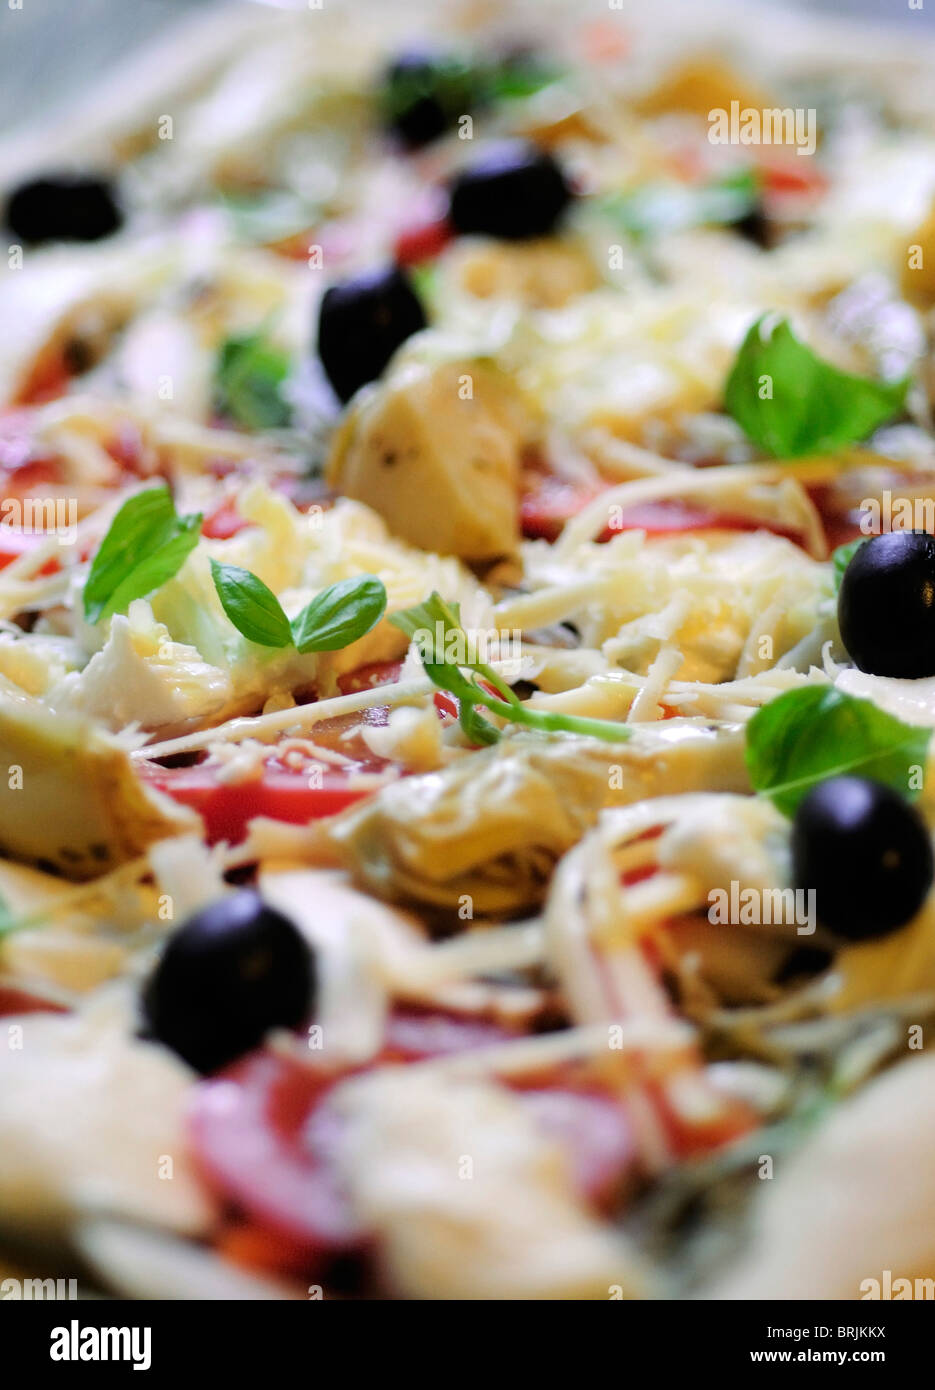 Uncooked toppings on fresh pizza, close-up Stock Photo